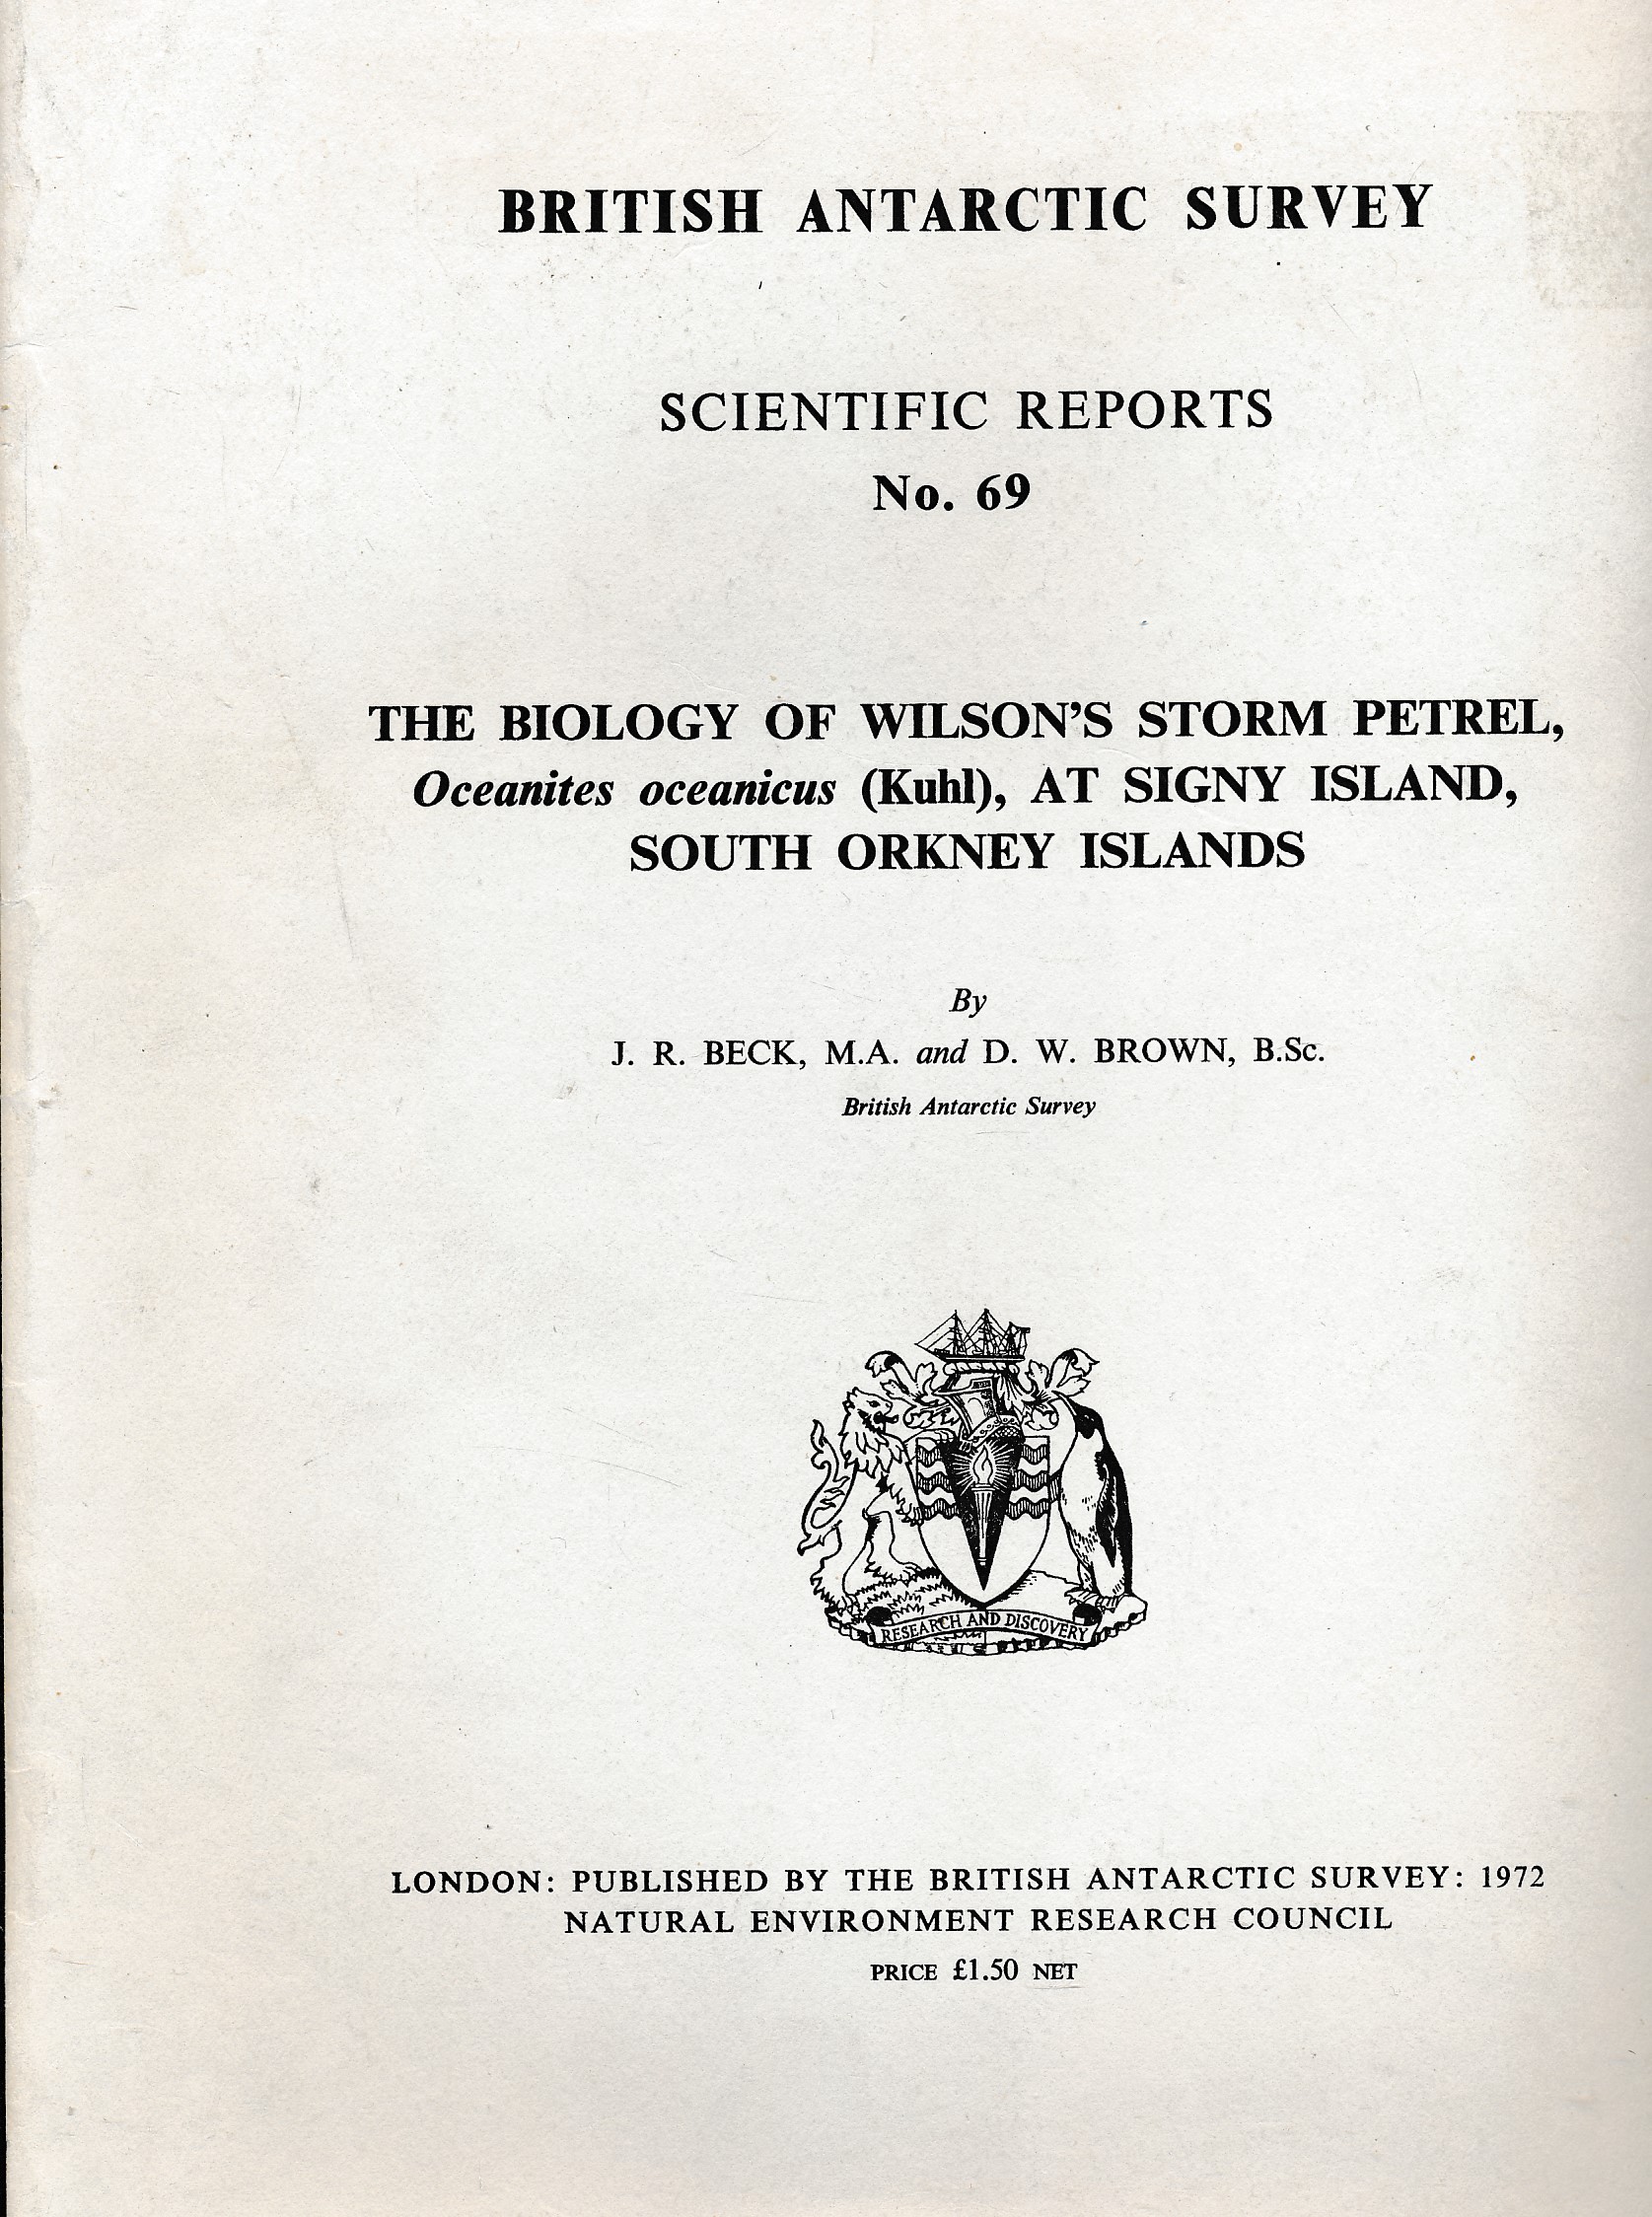 The Biology of Wilson's Storm Petrel, Oceanites Oceanicus [Kuhl], at Signy Island, South Orkney Islands. British Antarctic Survey. Scientific Reports No. 69